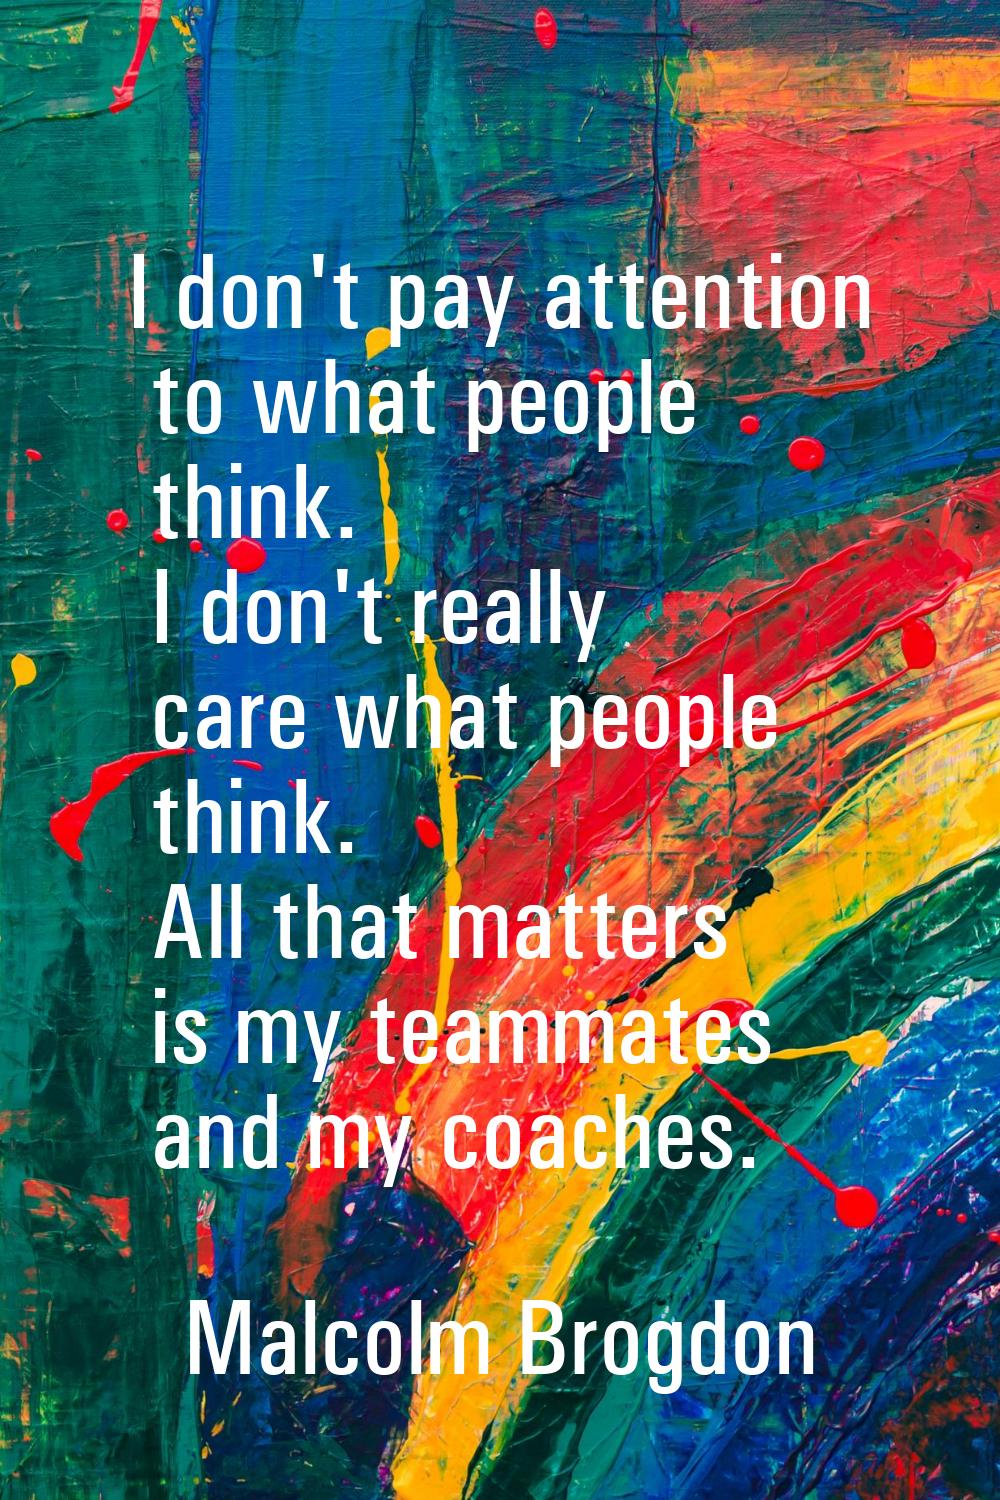 I don't pay attention to what people think. I don't really care what people think. All that matters